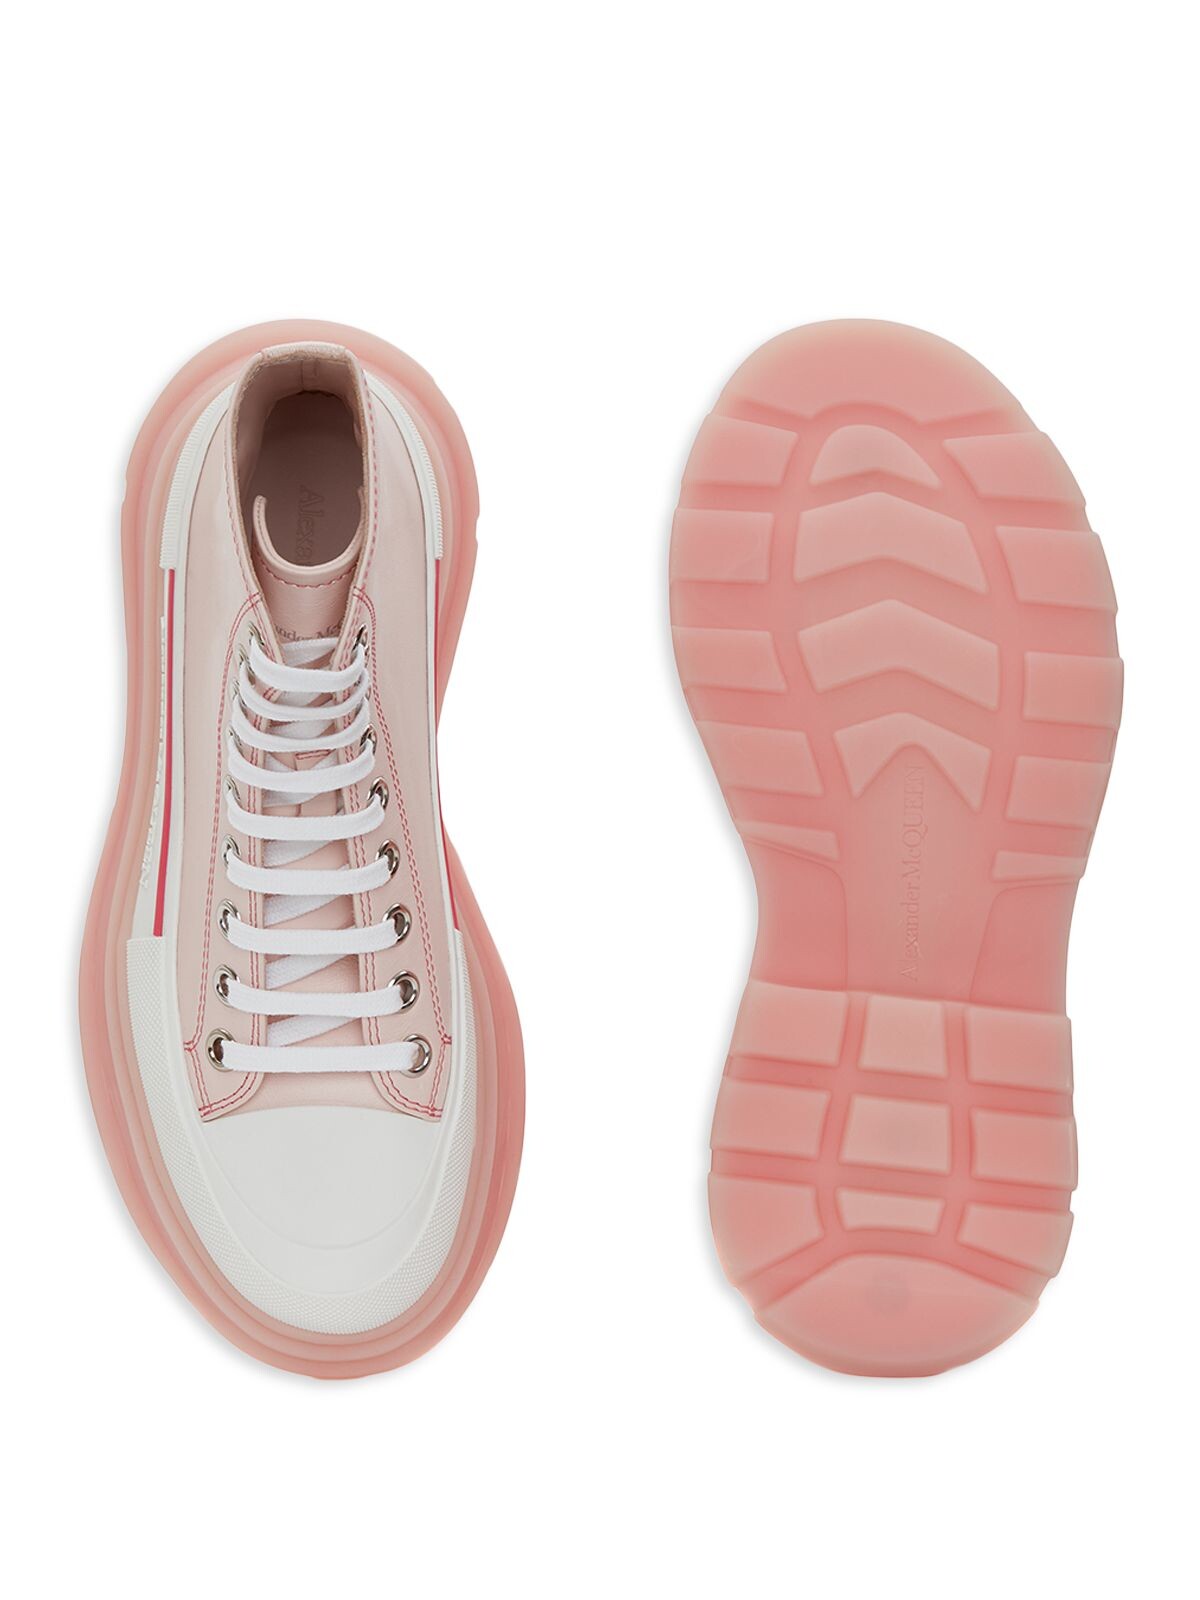 ALEXANDER MCQUEEN Womens Pink Lug Sole Logo Round Toe Wedge Lace-Up Leather Sneakers Shoes